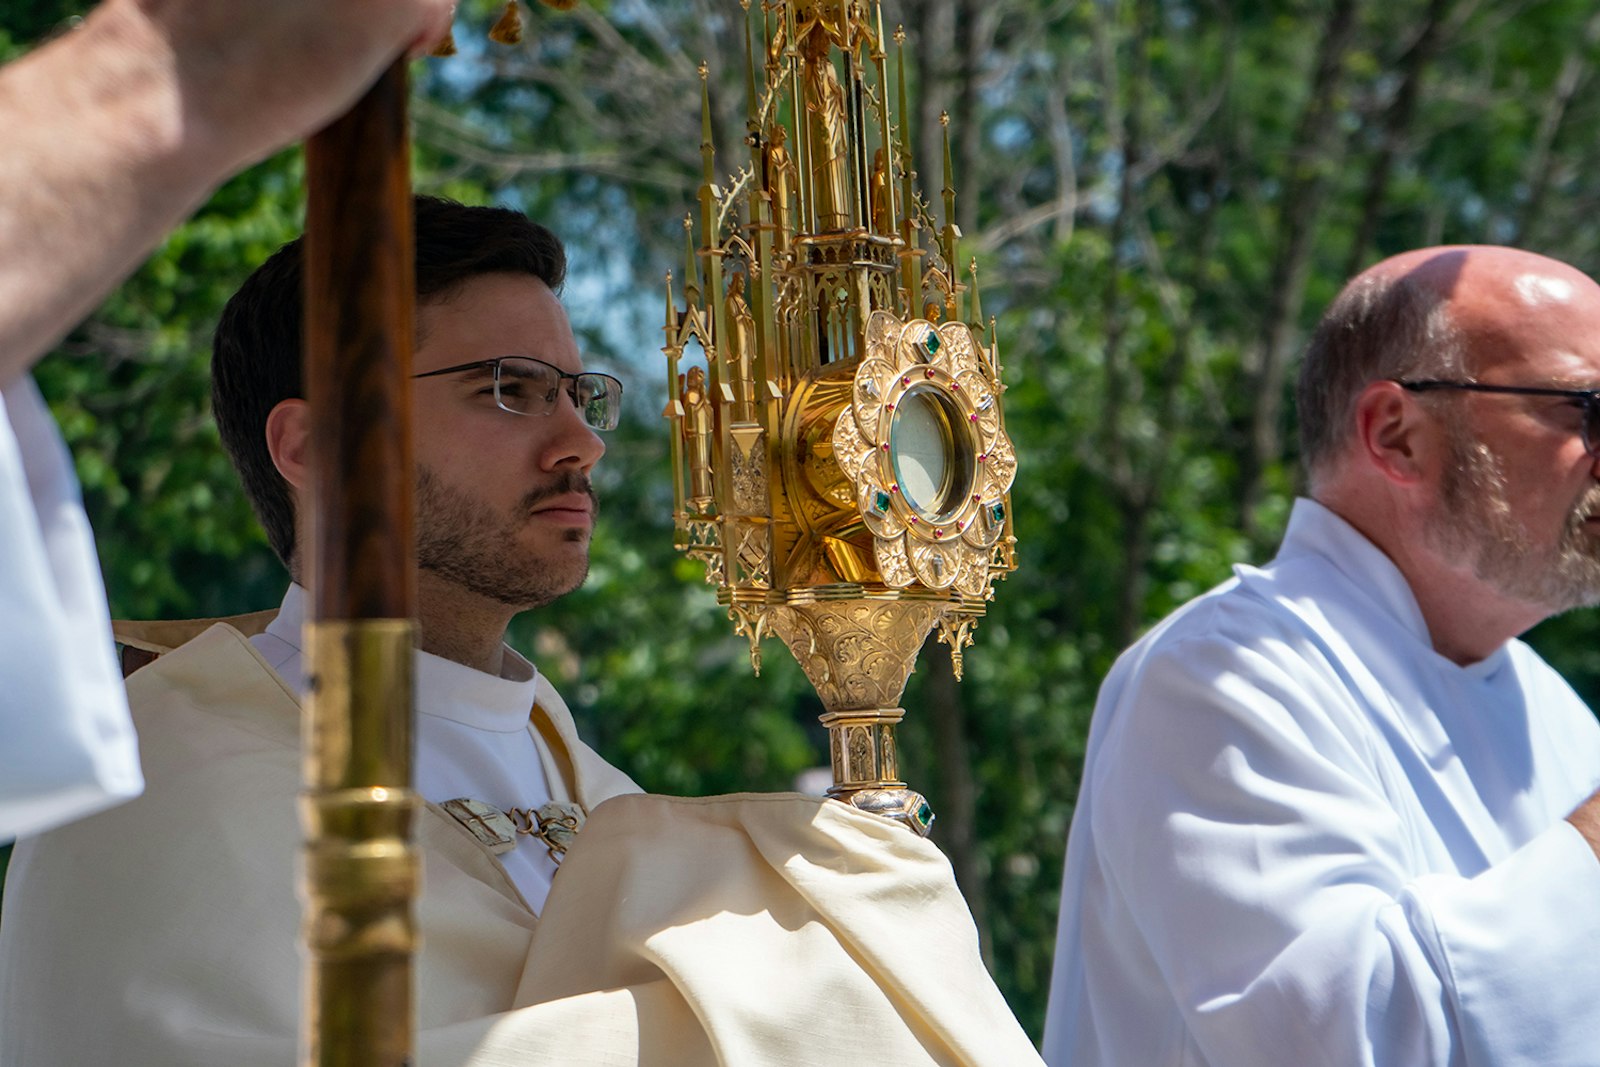 Deacon Jeremy Schupbach carries the Blessed Sacrament in a monstrance during a two-mile Eucharistic procession from the Cathedral of the Most Blessed Sacrament to Sacred Heart Major Seminary in Detroit on June 19, the feast of Corpus Christi. The procession, led by Archbishop Allen H. Vigneron, kicks off a three-year Eucharistic revival in the Archdiocese of Detroit. (Matthew Rich | Special to Detroit Catholic)